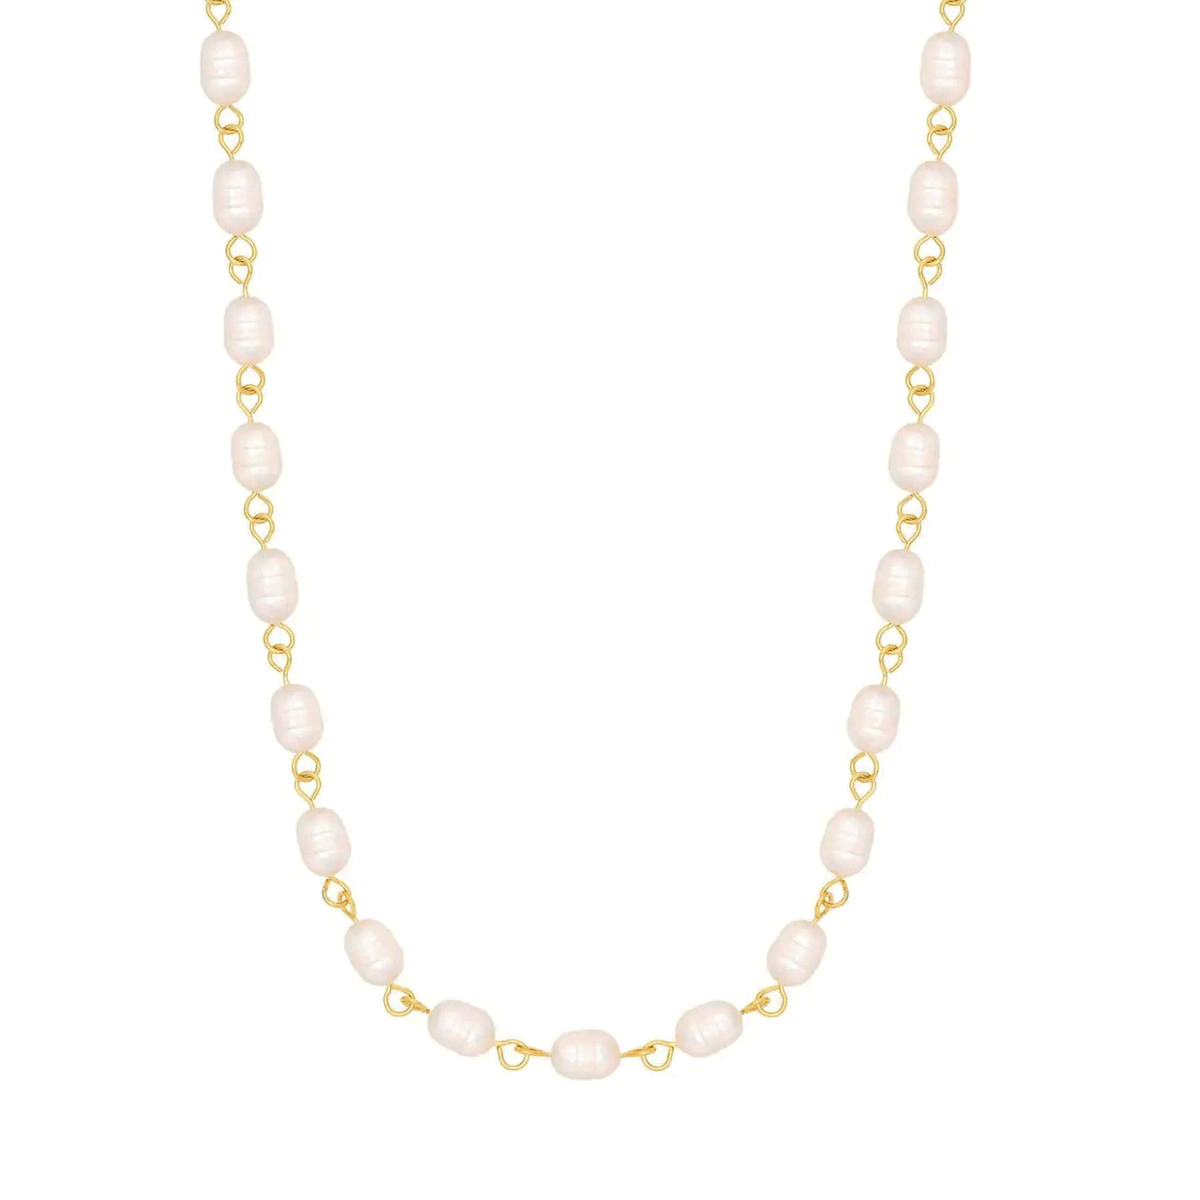 BohoMoon Stainless Steel Adrienne Pearl Necklace Gold